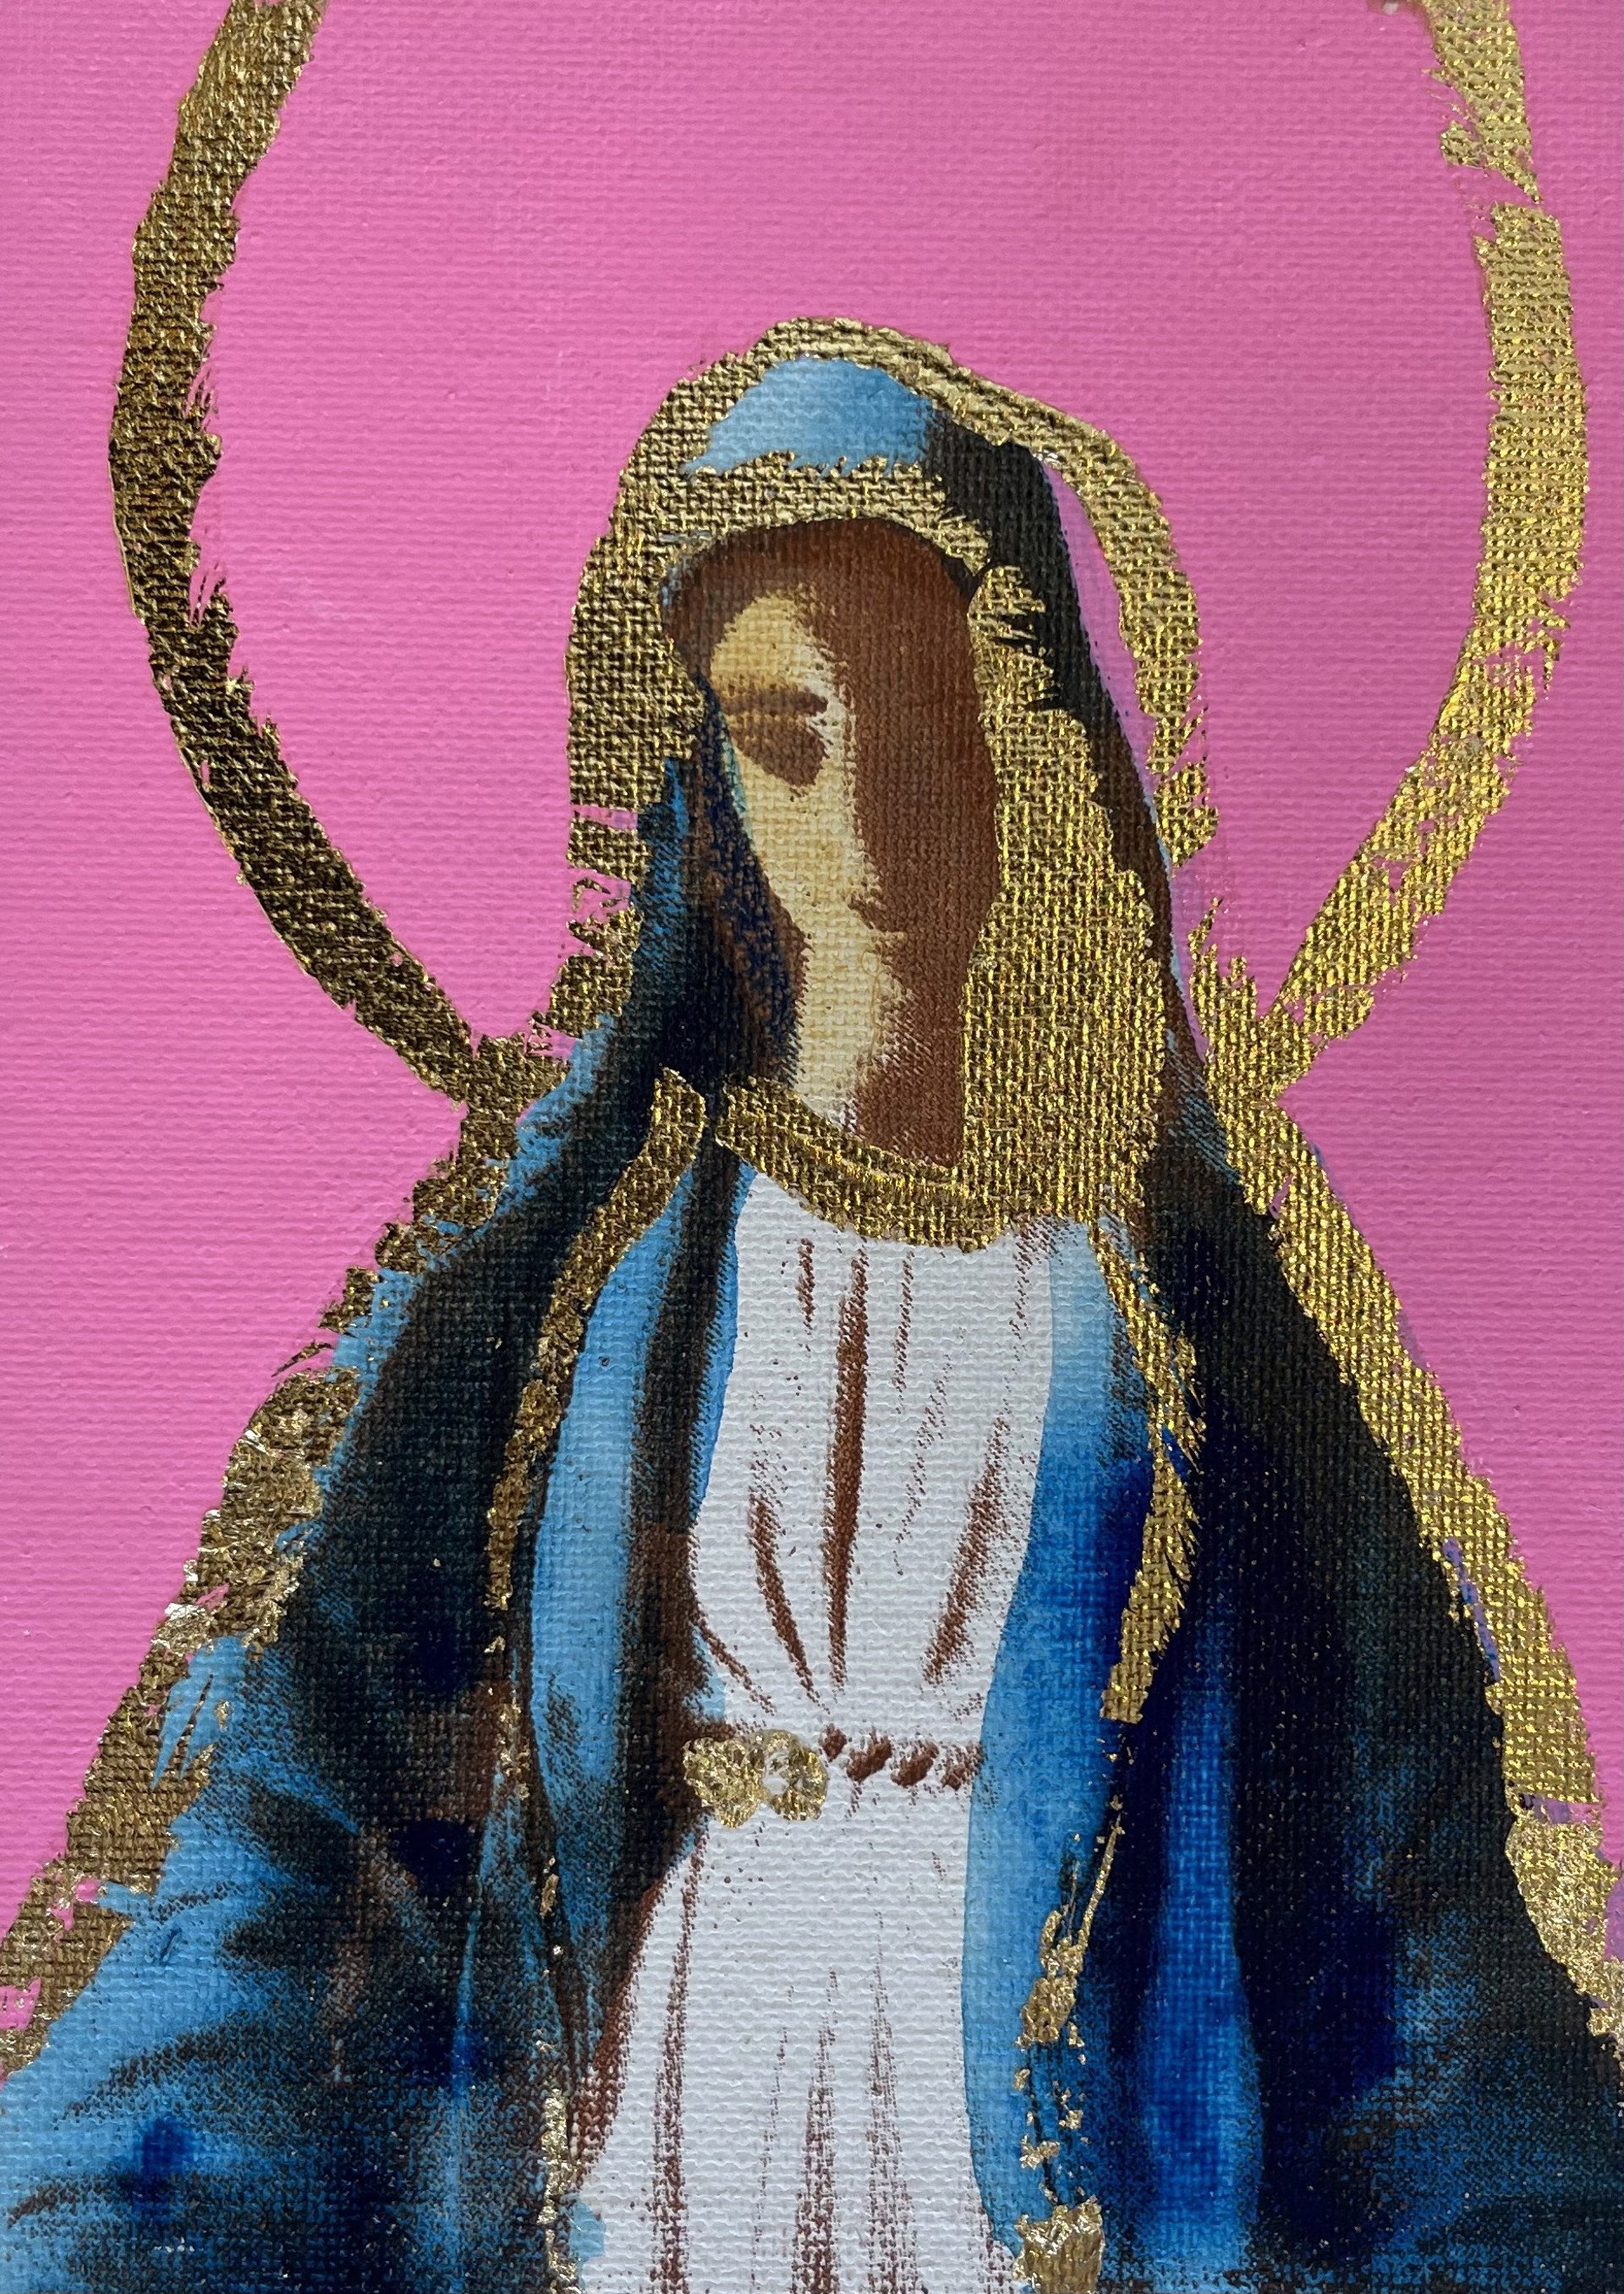 Hail Mary 3 by Megan Coonelly